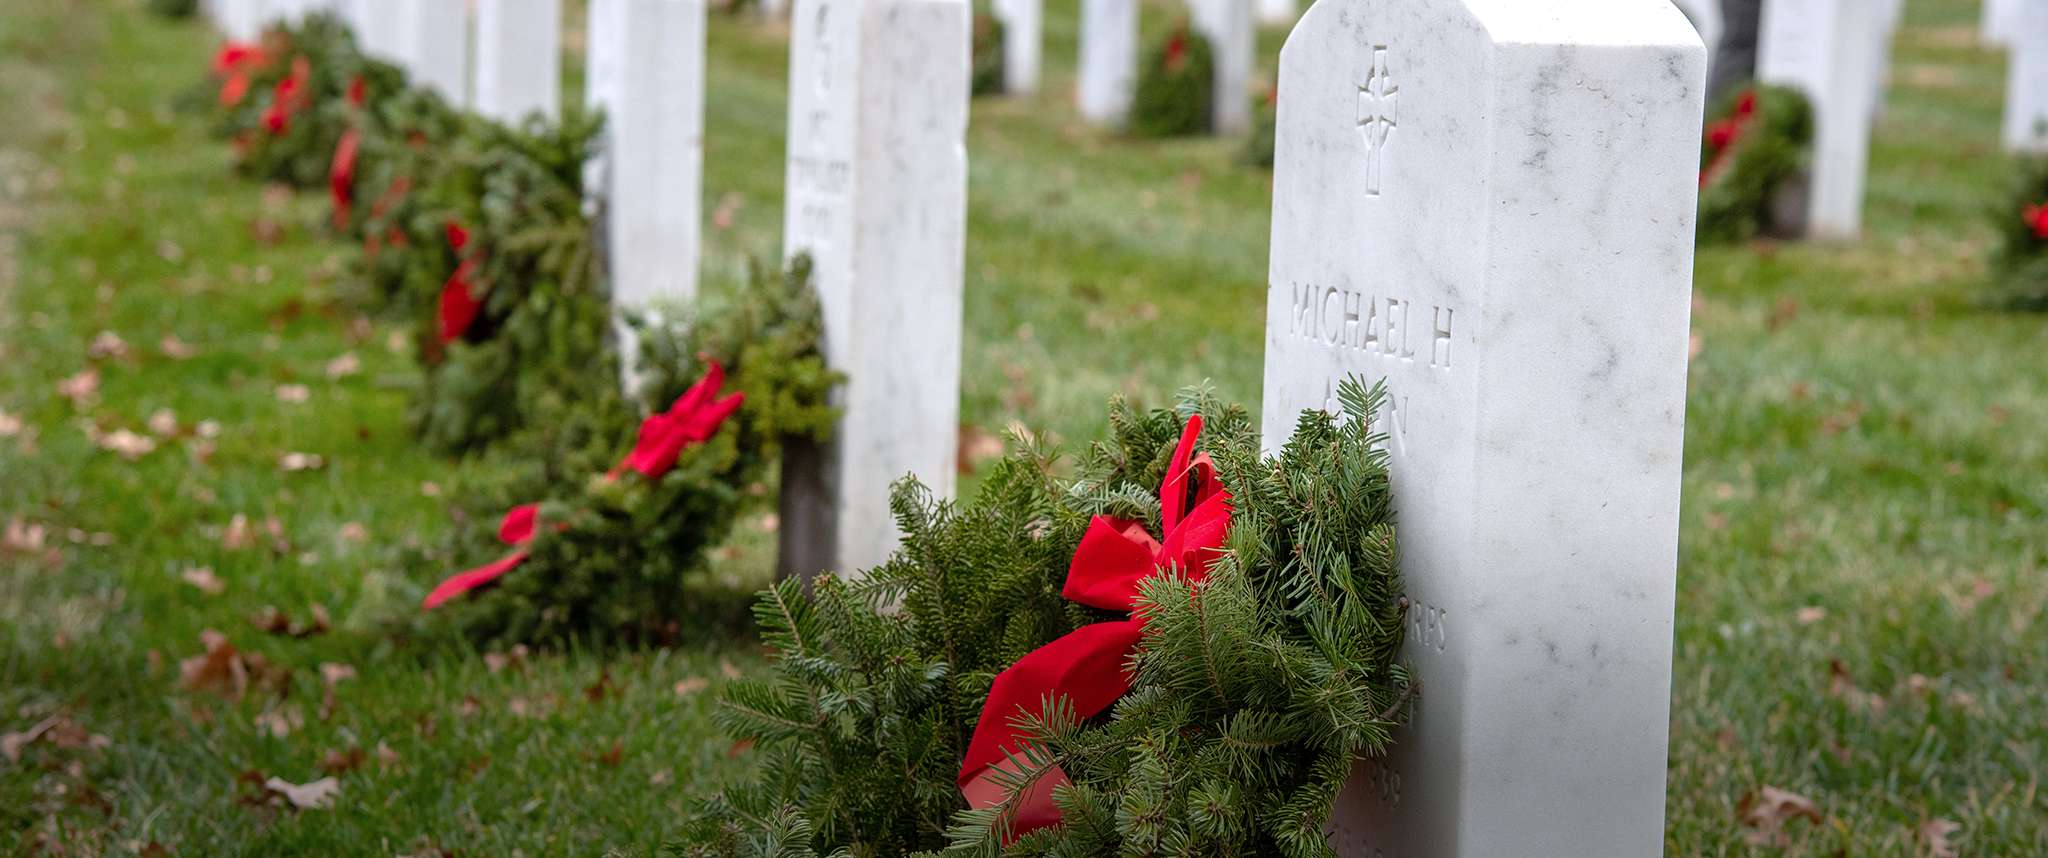 Aerospace Military Veterans group organized a donation and volunteer campaign for Wreaths Across America, helping to ensure that U.S. veterans are honored for their service during the holidays 